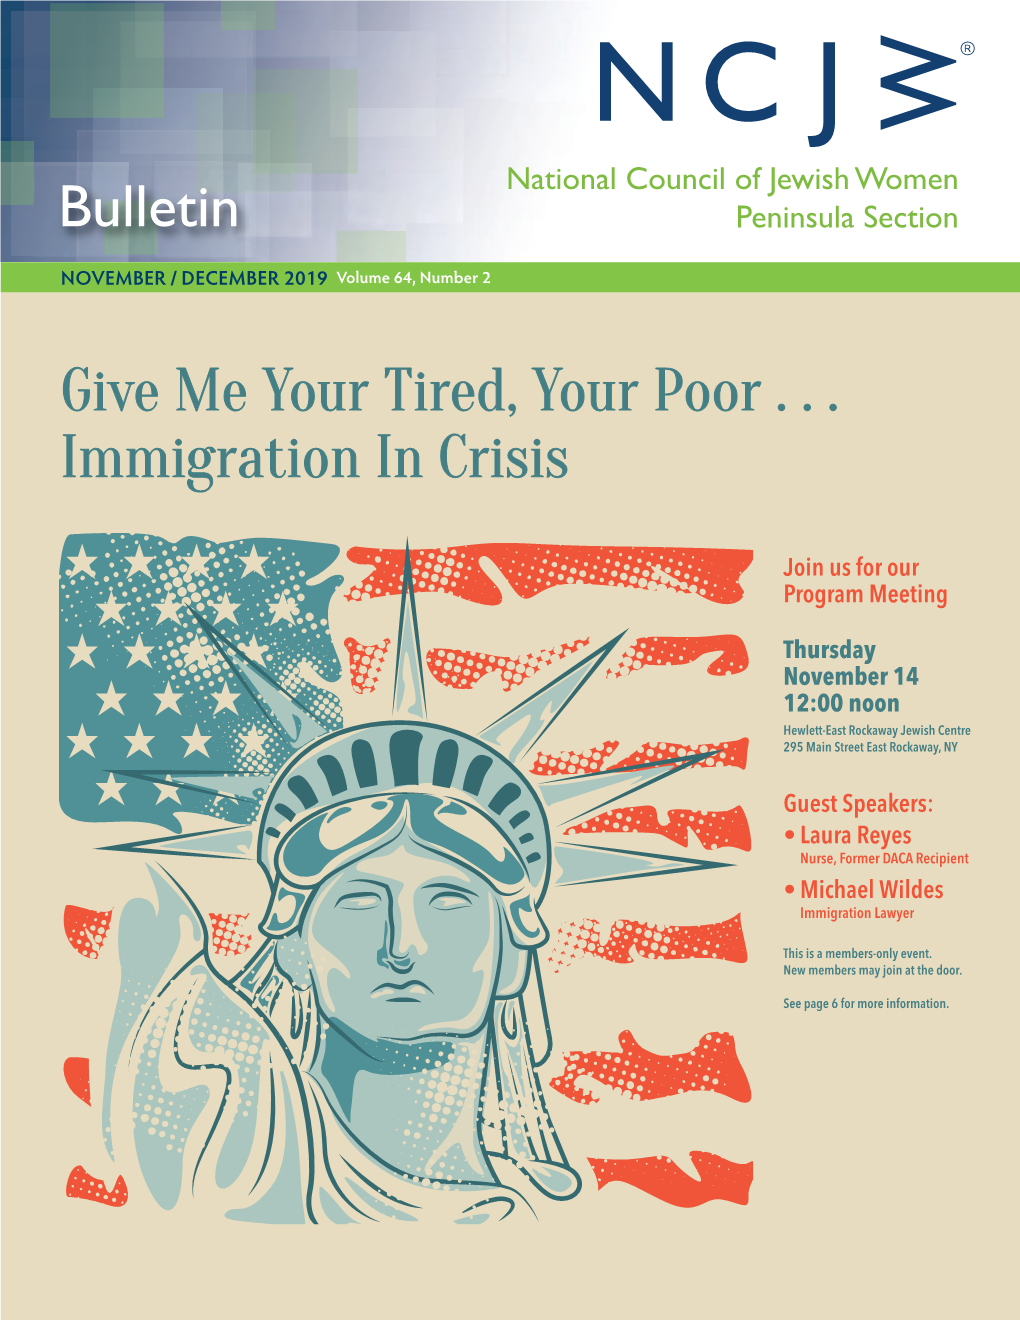 Bulletin Give Me Your Tired, Your Poor . . . Immigration in Crisis